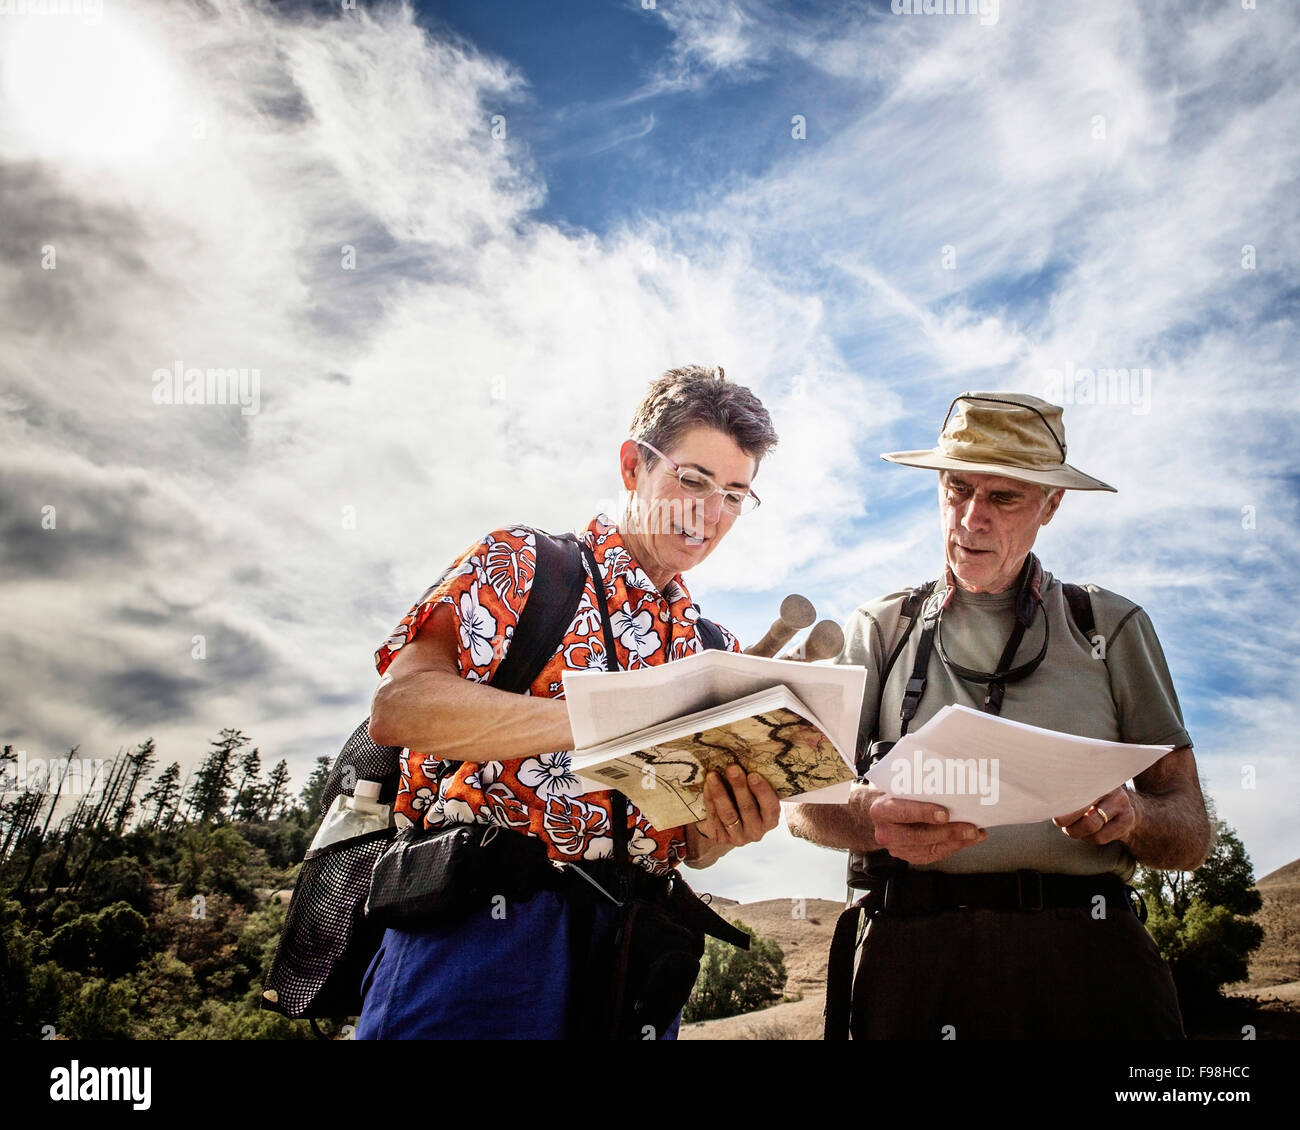 A male and female hiker stop to consult a book and map. Stock Photo